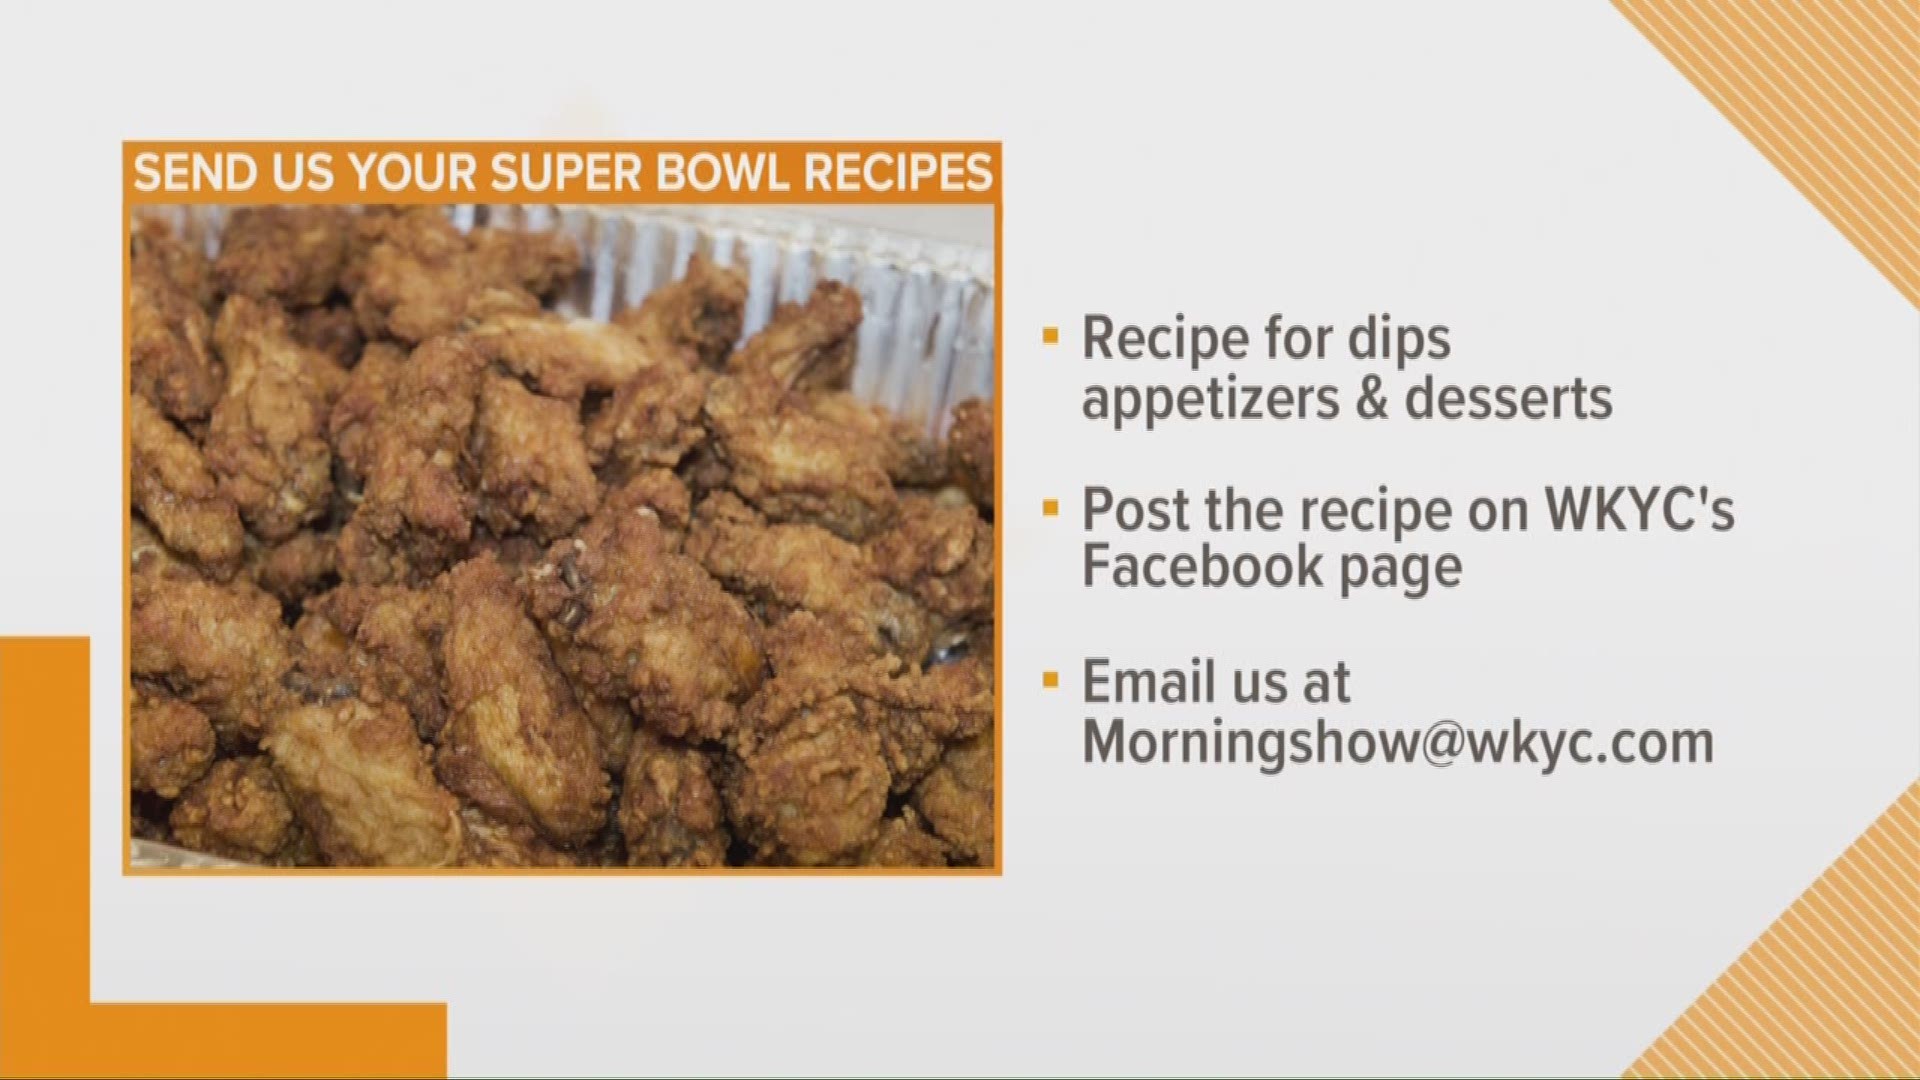 Jan, 28, 2019: Do you have the best recipe for dips, appetizers or desserts for Super Bowl Sunday? We want to make it and share it with everyone! Head over to the WKYC Facebook page and post the recipe, or e-mail them to us at Morningshow@wkyc.com.